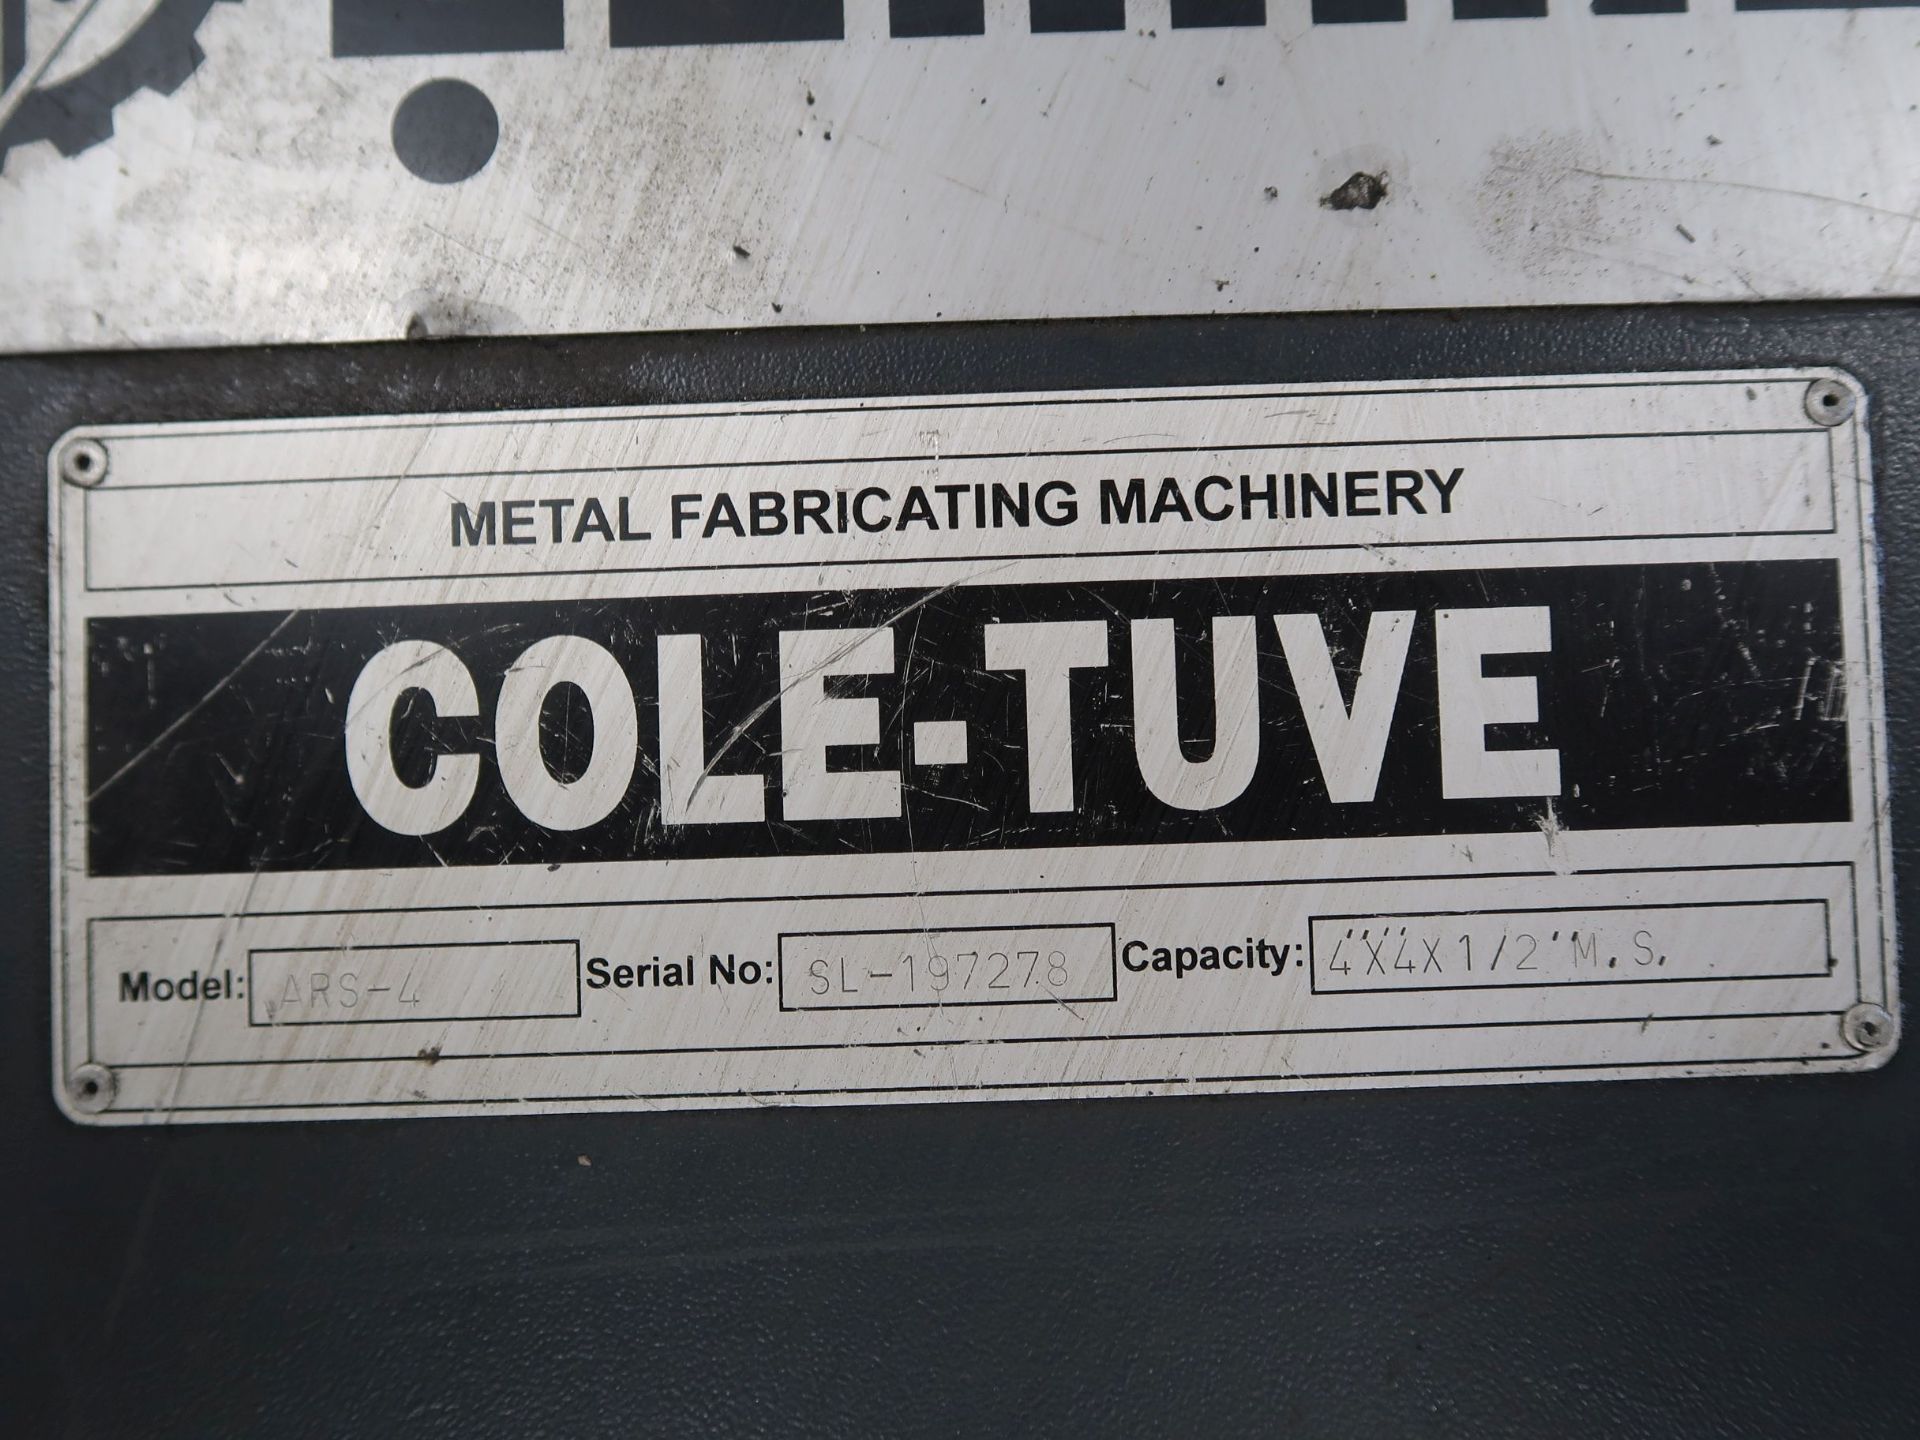 4" X 4" X 1/2" COLE-TUVE SAHINLER MODEL ARS-4 VERTICAL / HORIZONTAL HYDRAULIC ANGLE BENDING ROLL; S/ - Image 9 of 9